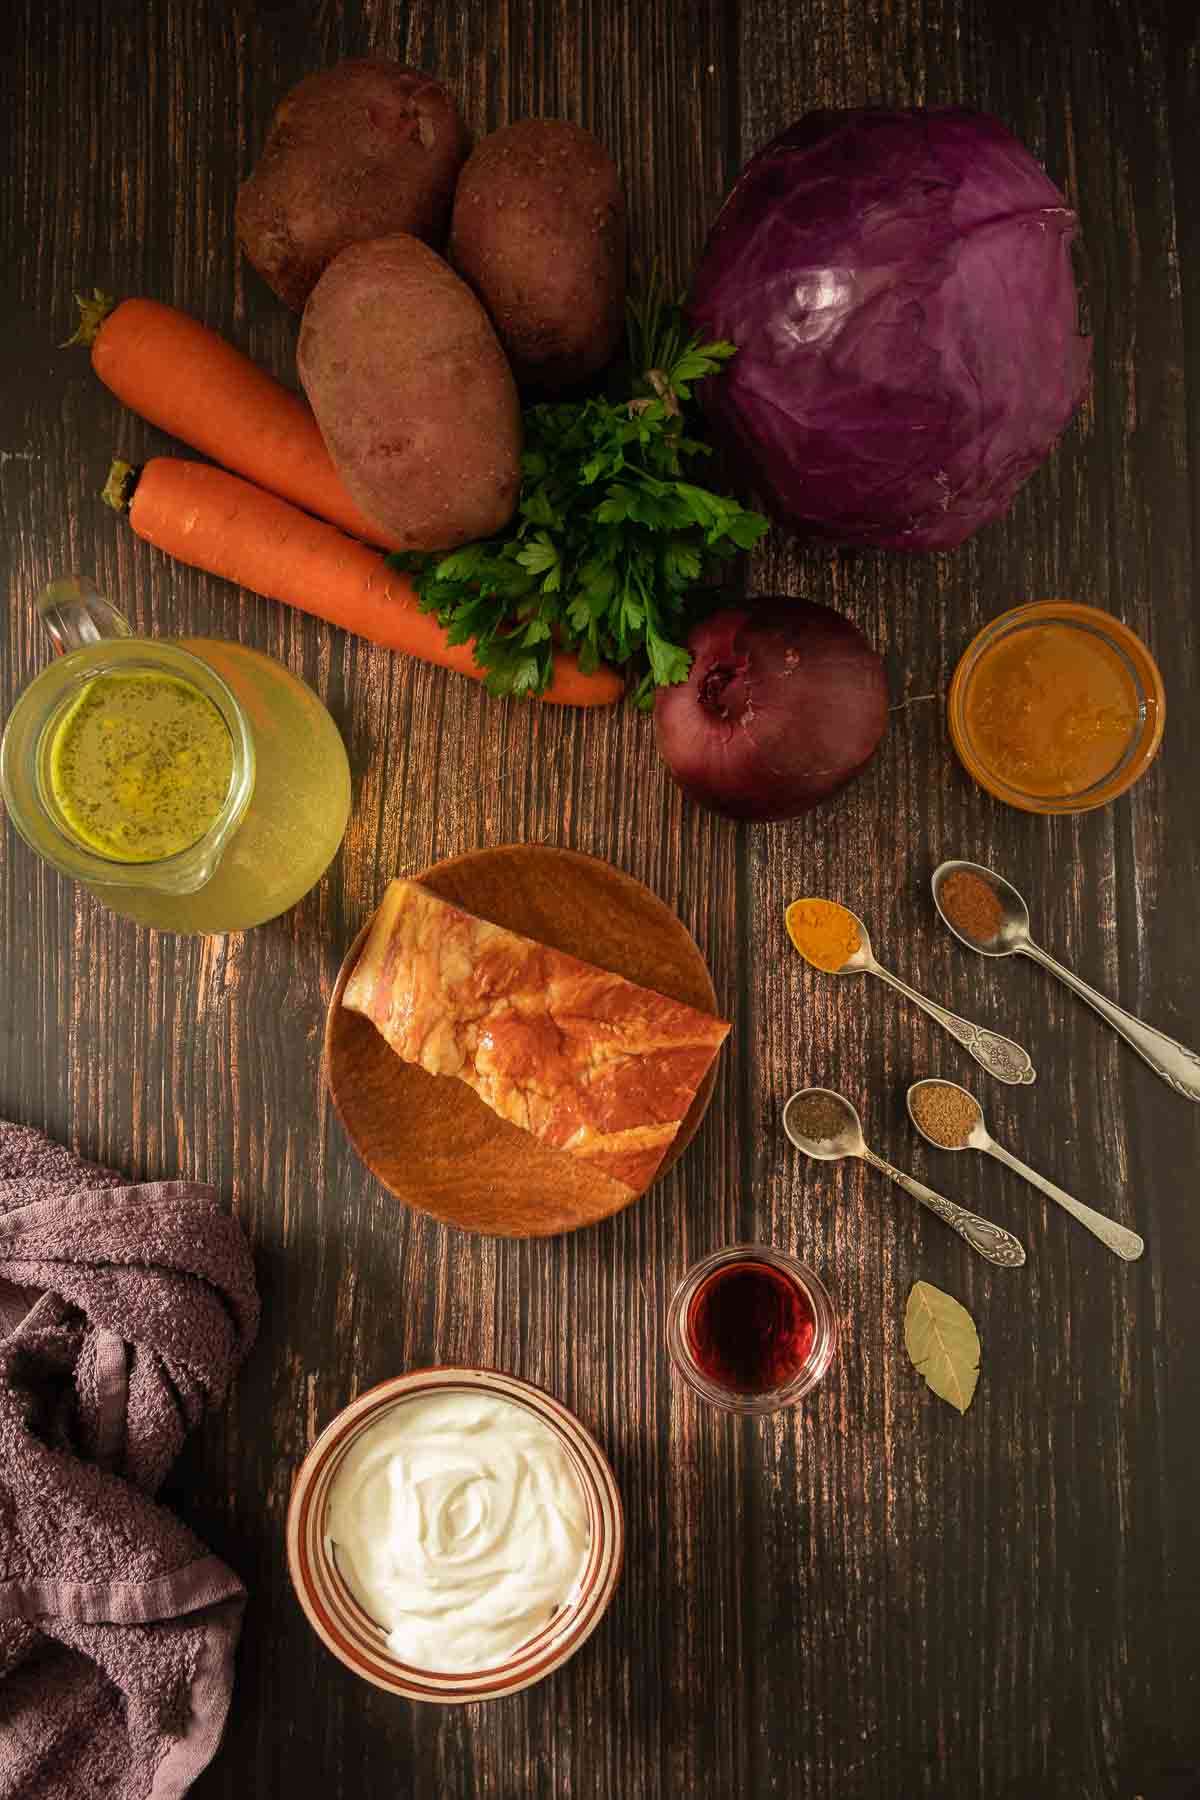 All of the ingredients needed to make this red cabbage soup.